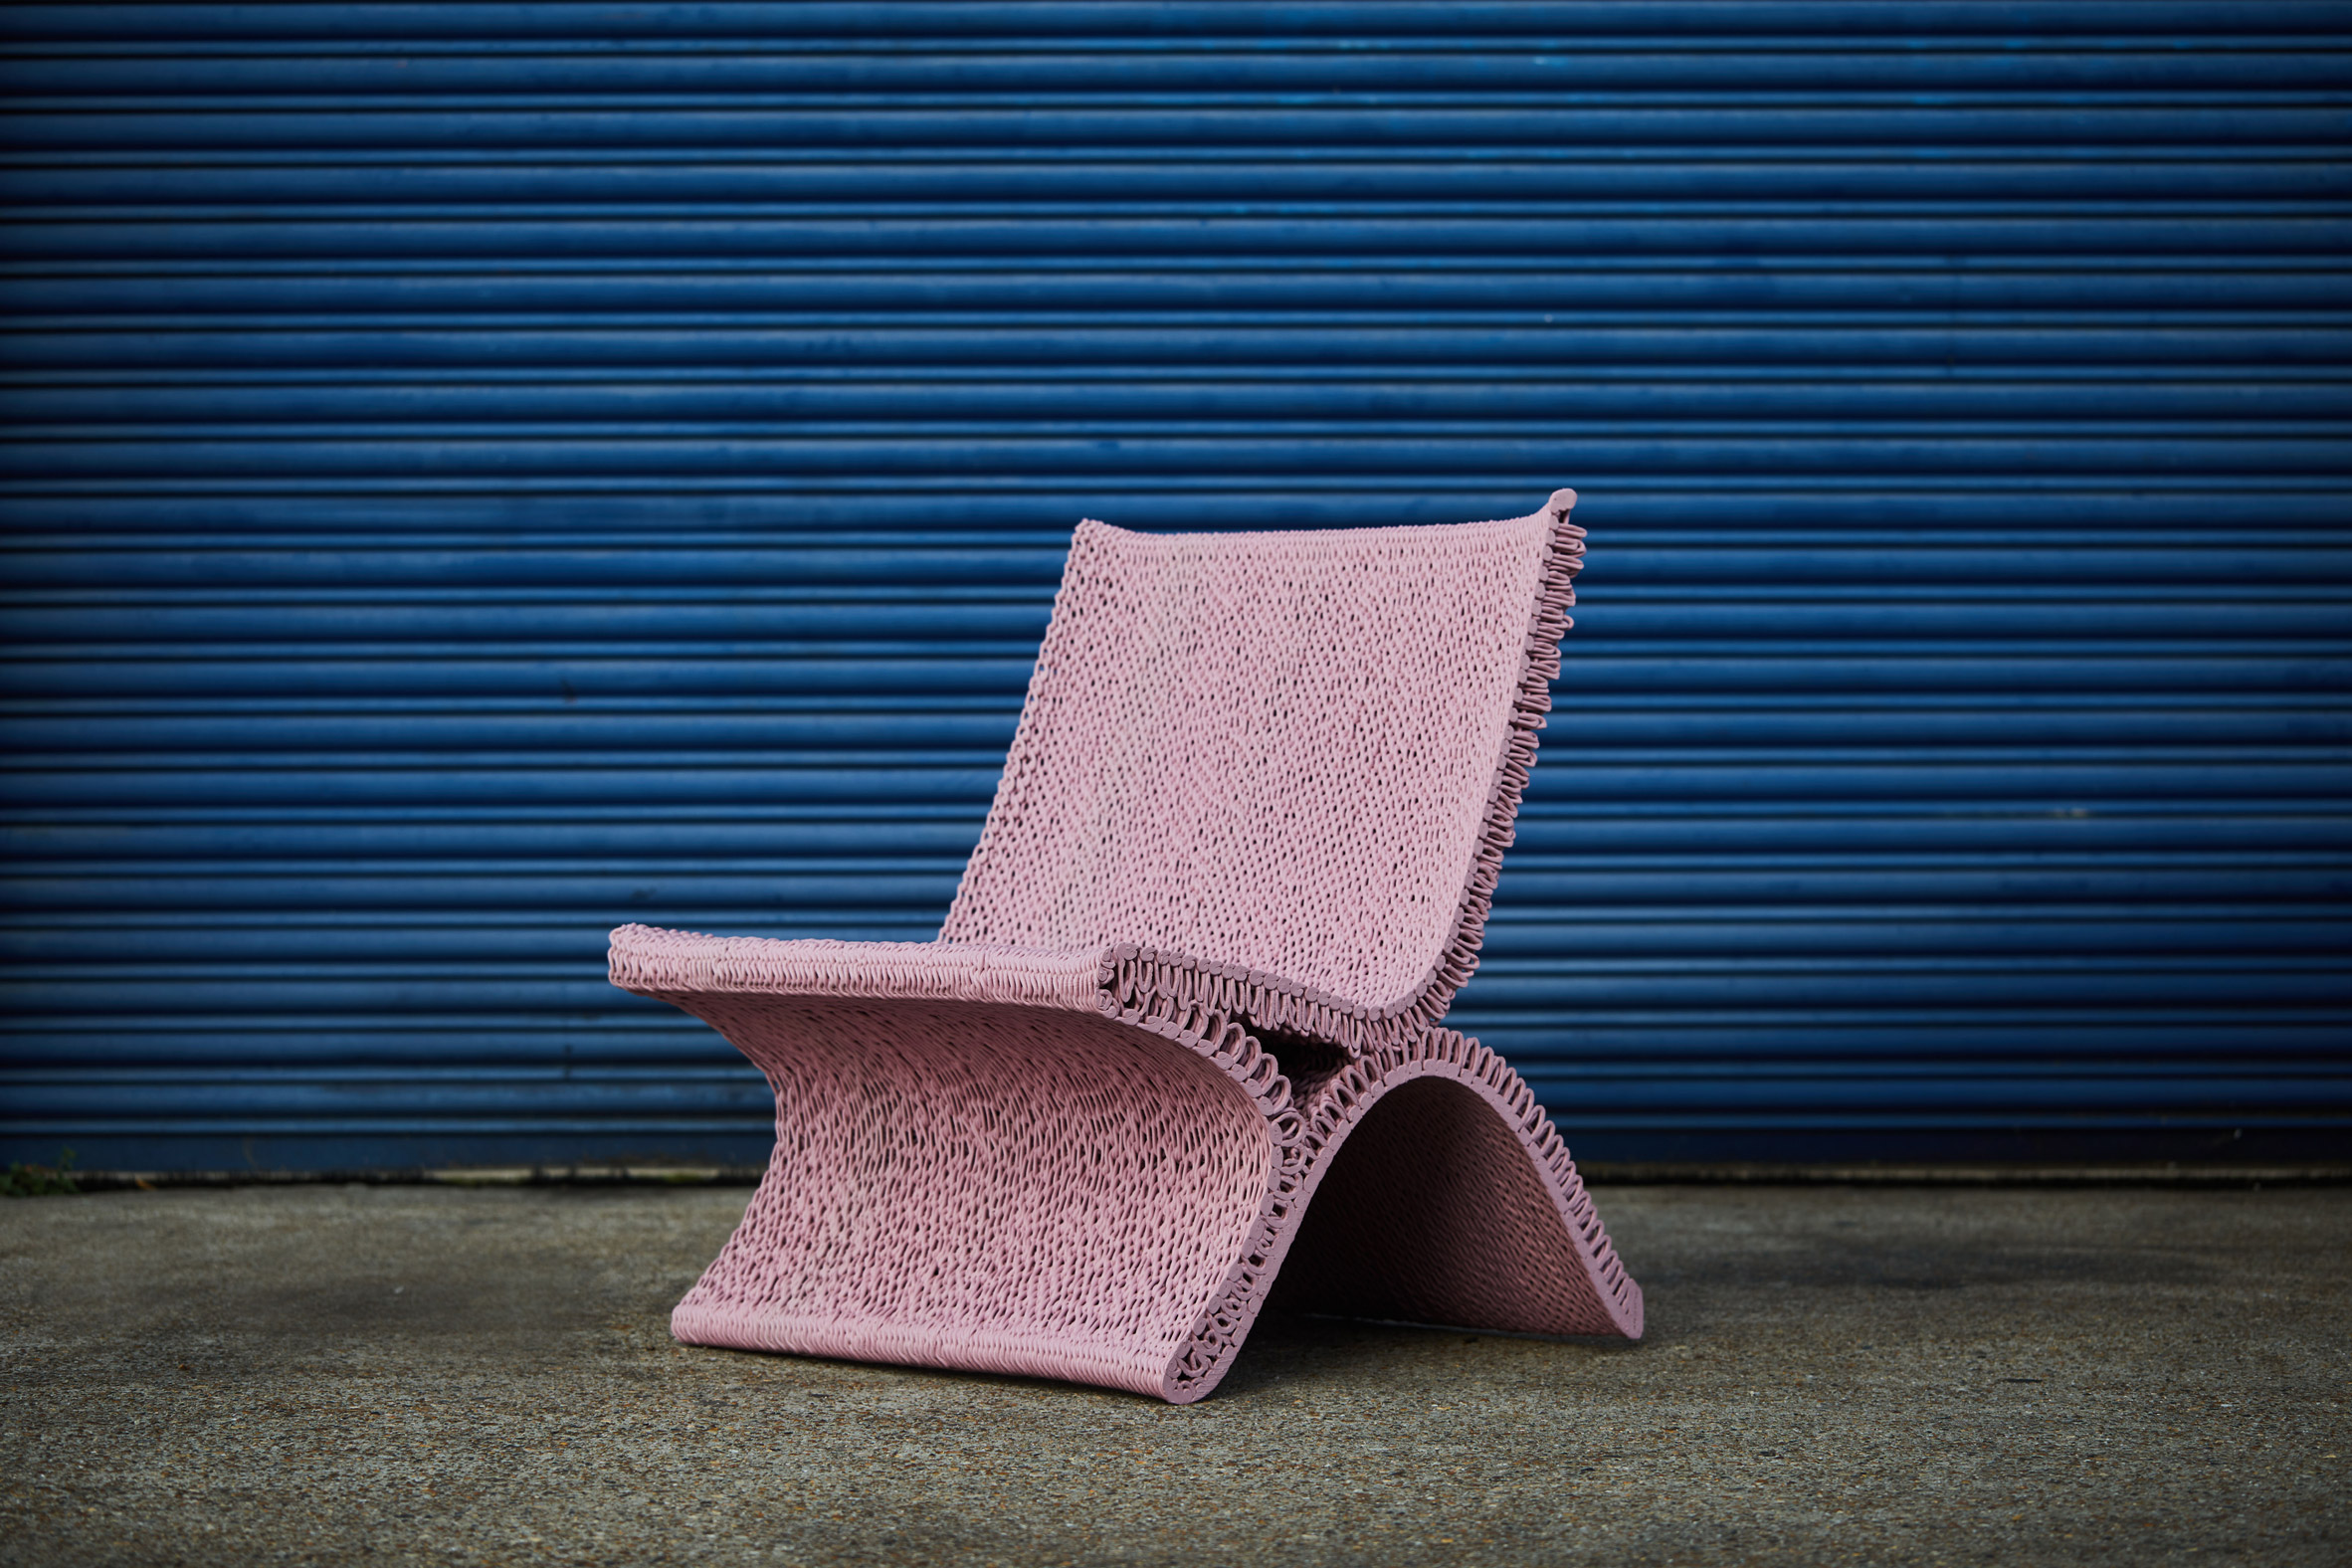 Photo of a pink chair 3D-printed in loops of plastic cord outside on a concrete pavement in front of a blue roller door